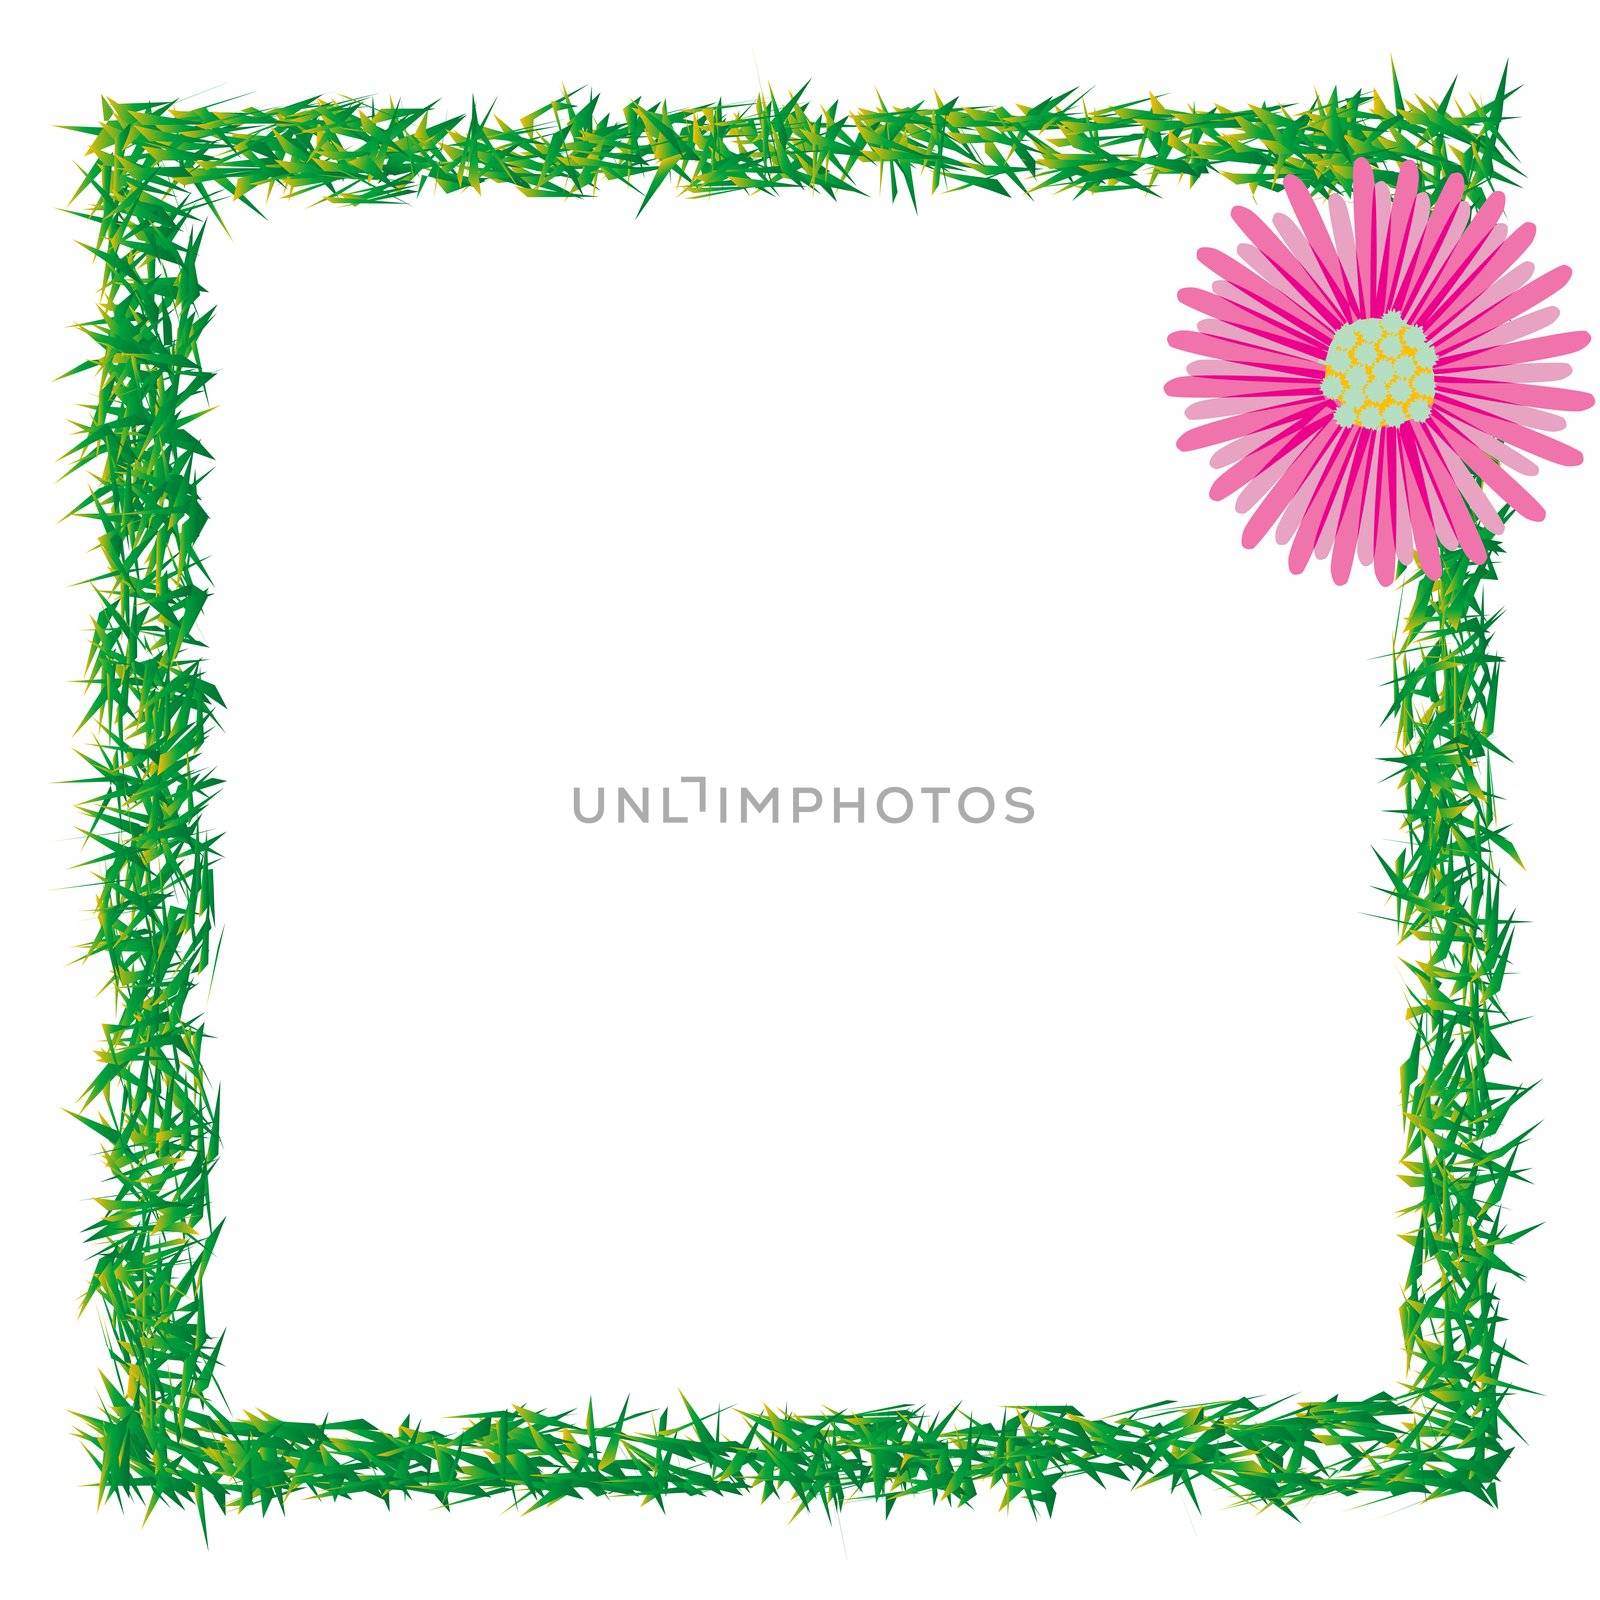 grass and flower photo frame, abstract art illustration